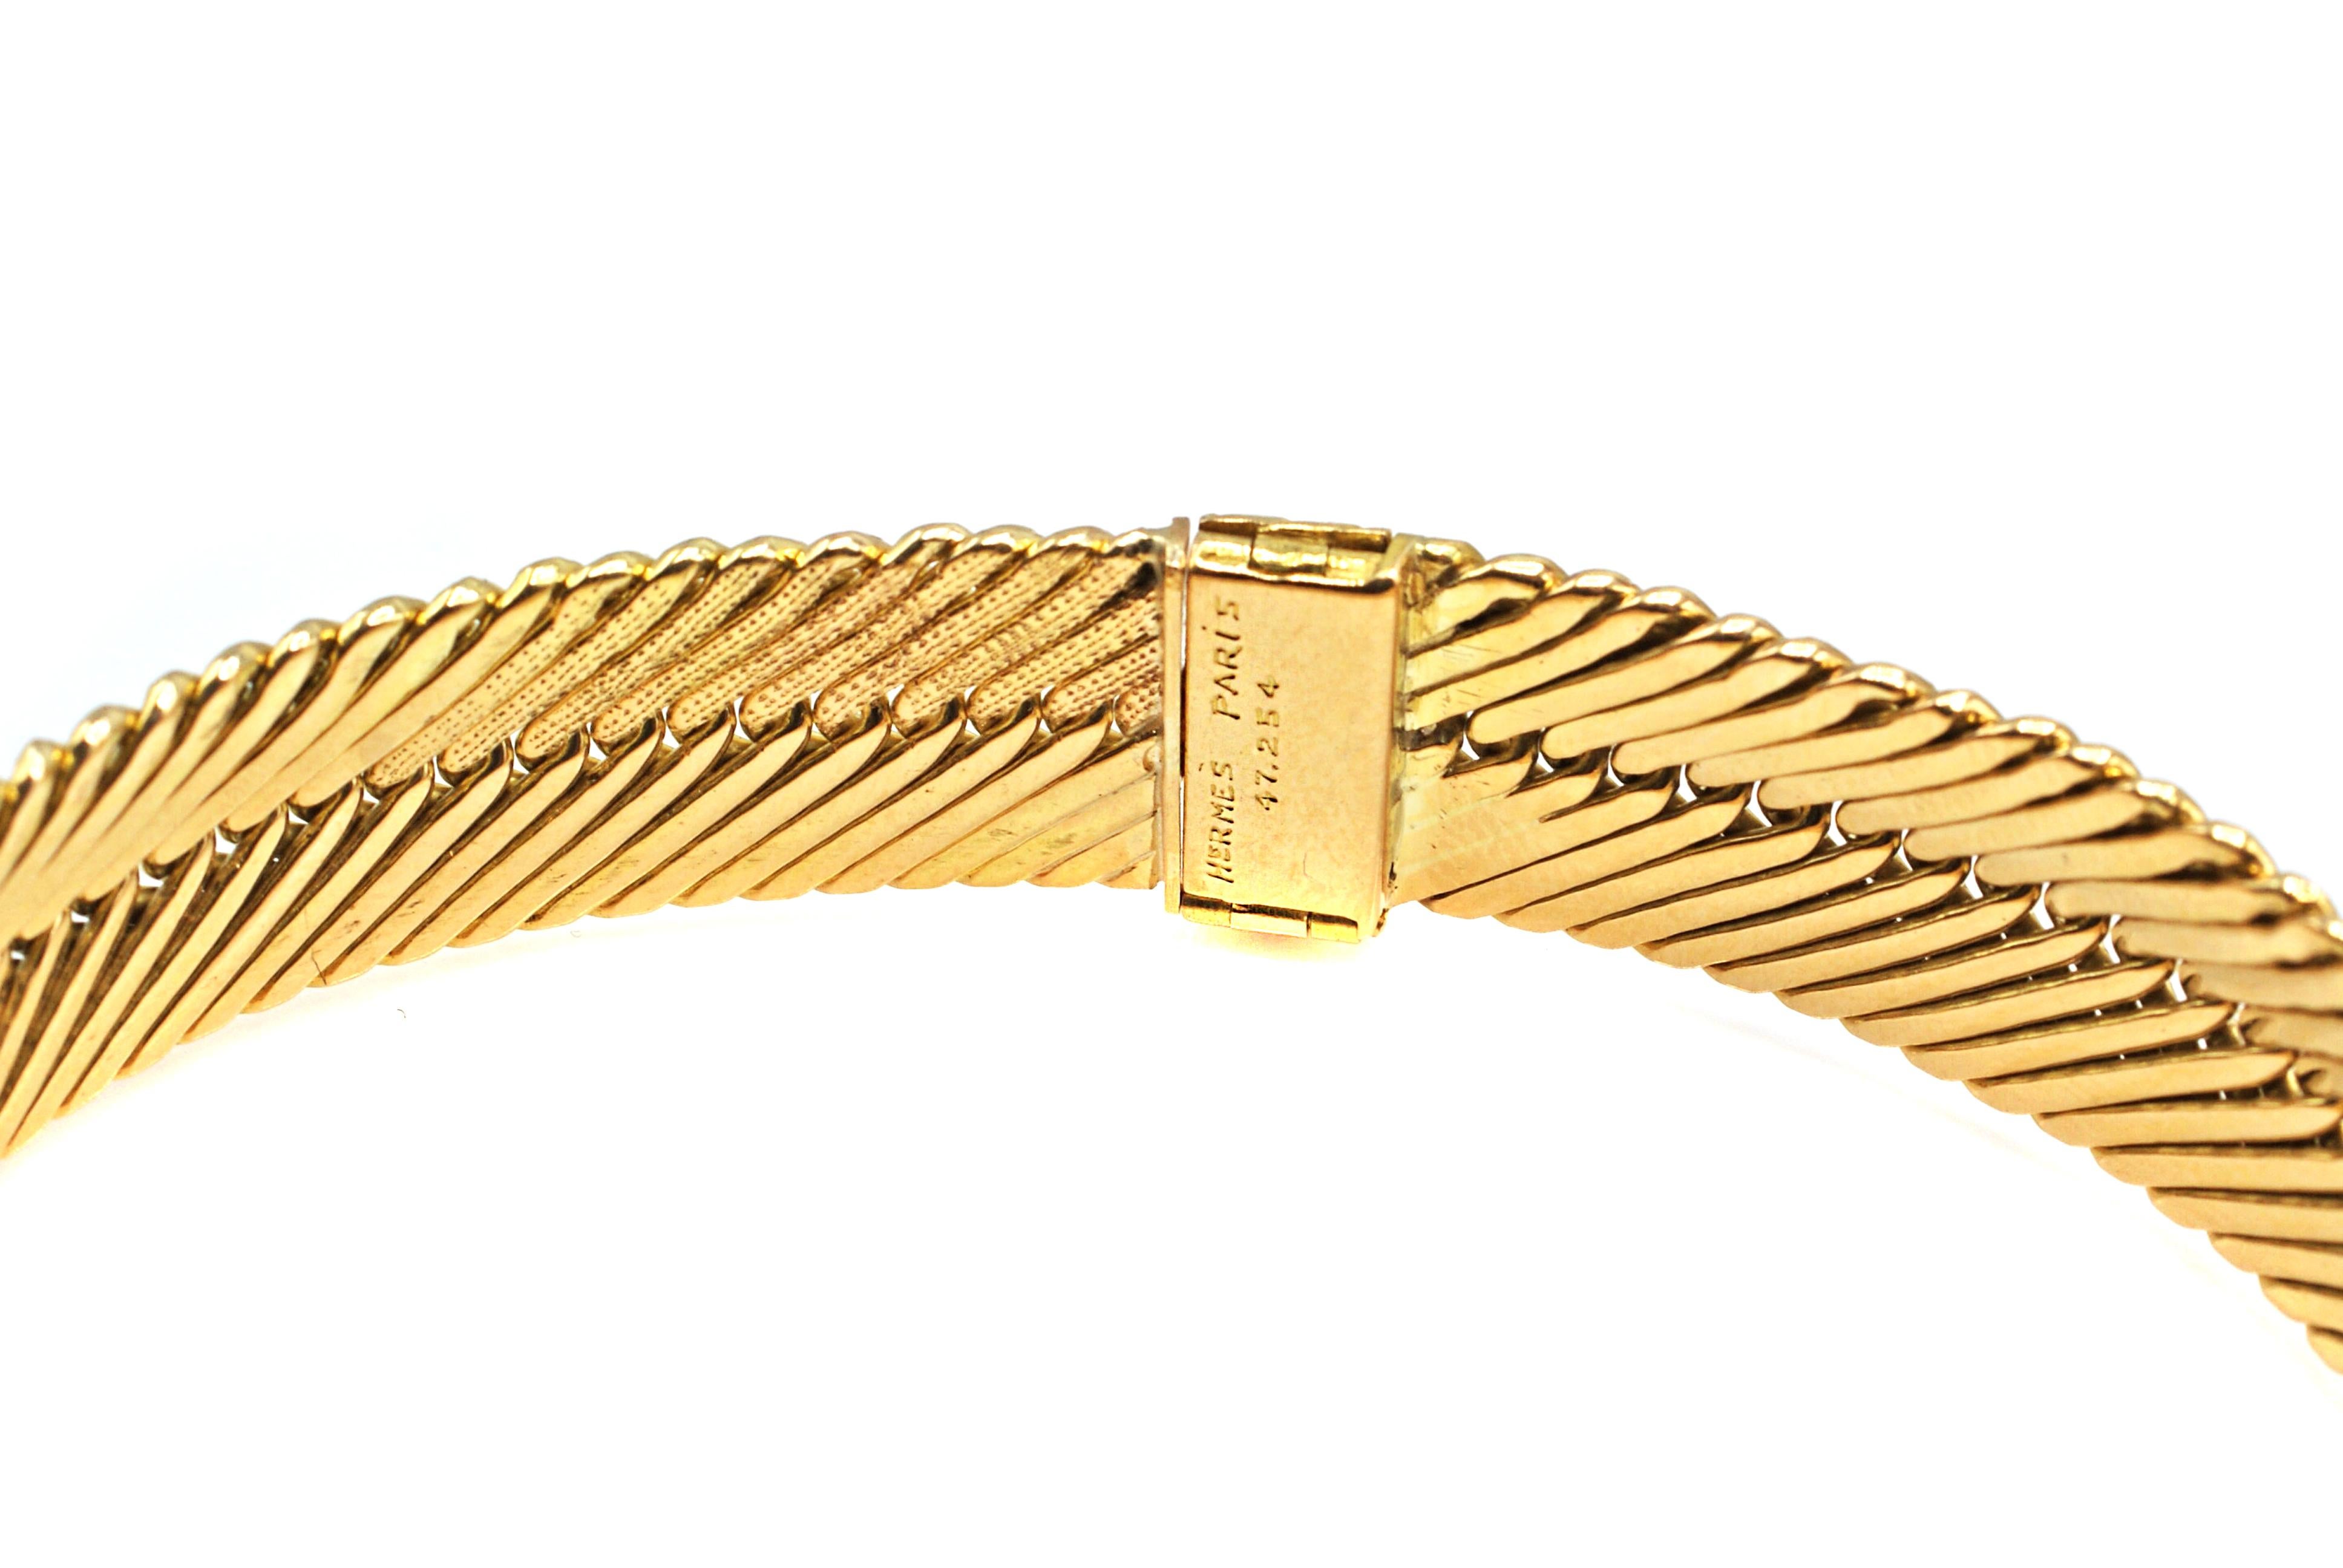 Beautifully hand-crafted this chic and stylish 18 karat yellow gold bracelet by Hermes Paris is a must-have accessory. The flexible links in a herringbone design have half the side in a high polished gold while the other half displays granulated